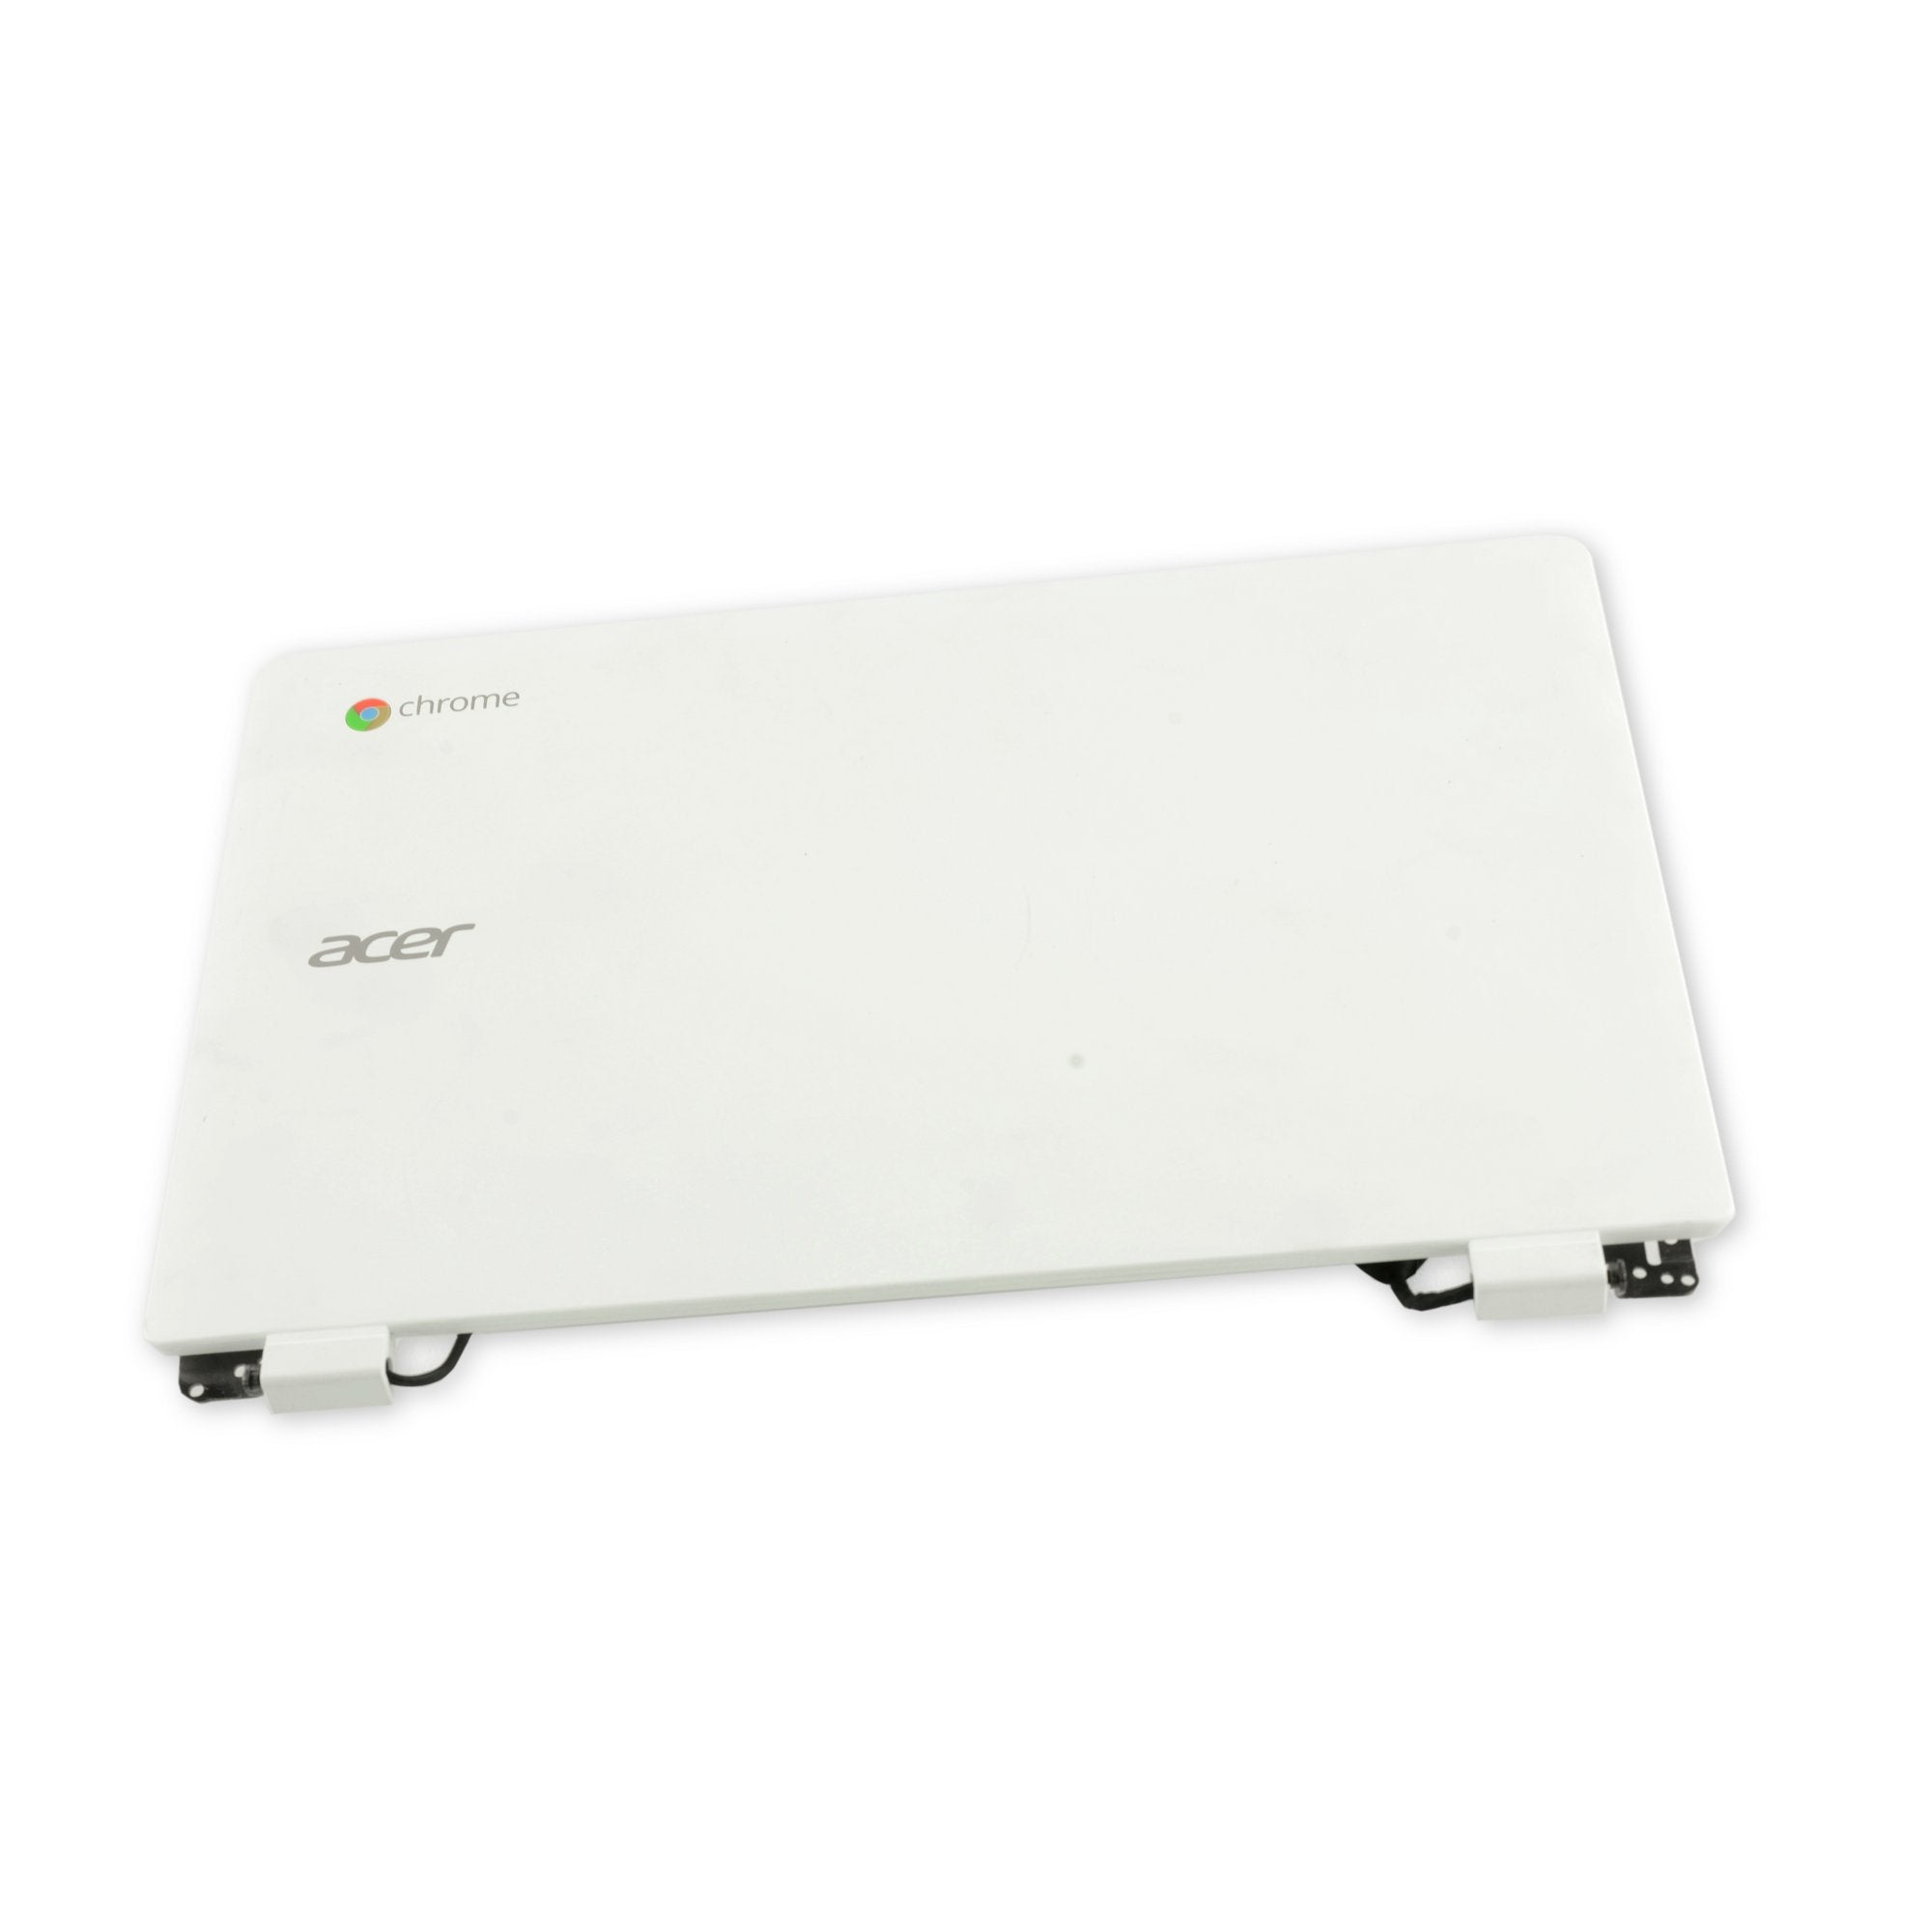 Acer Chromebook CB3-111-C670 Display Assembly